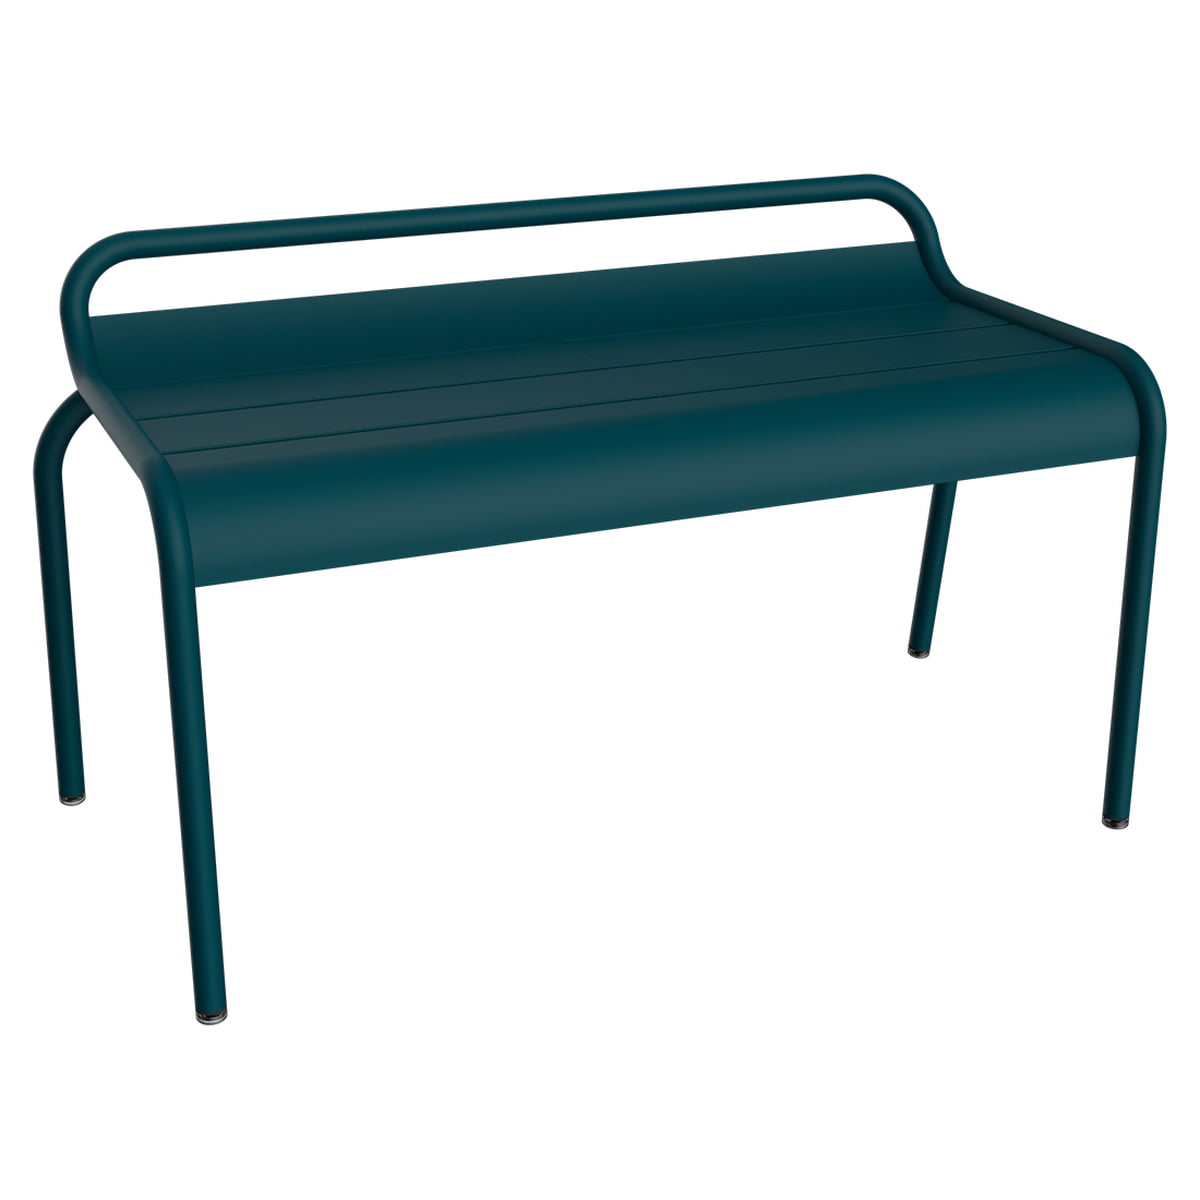 Fermob - Luxembourg Garden bench without backrest | Connox